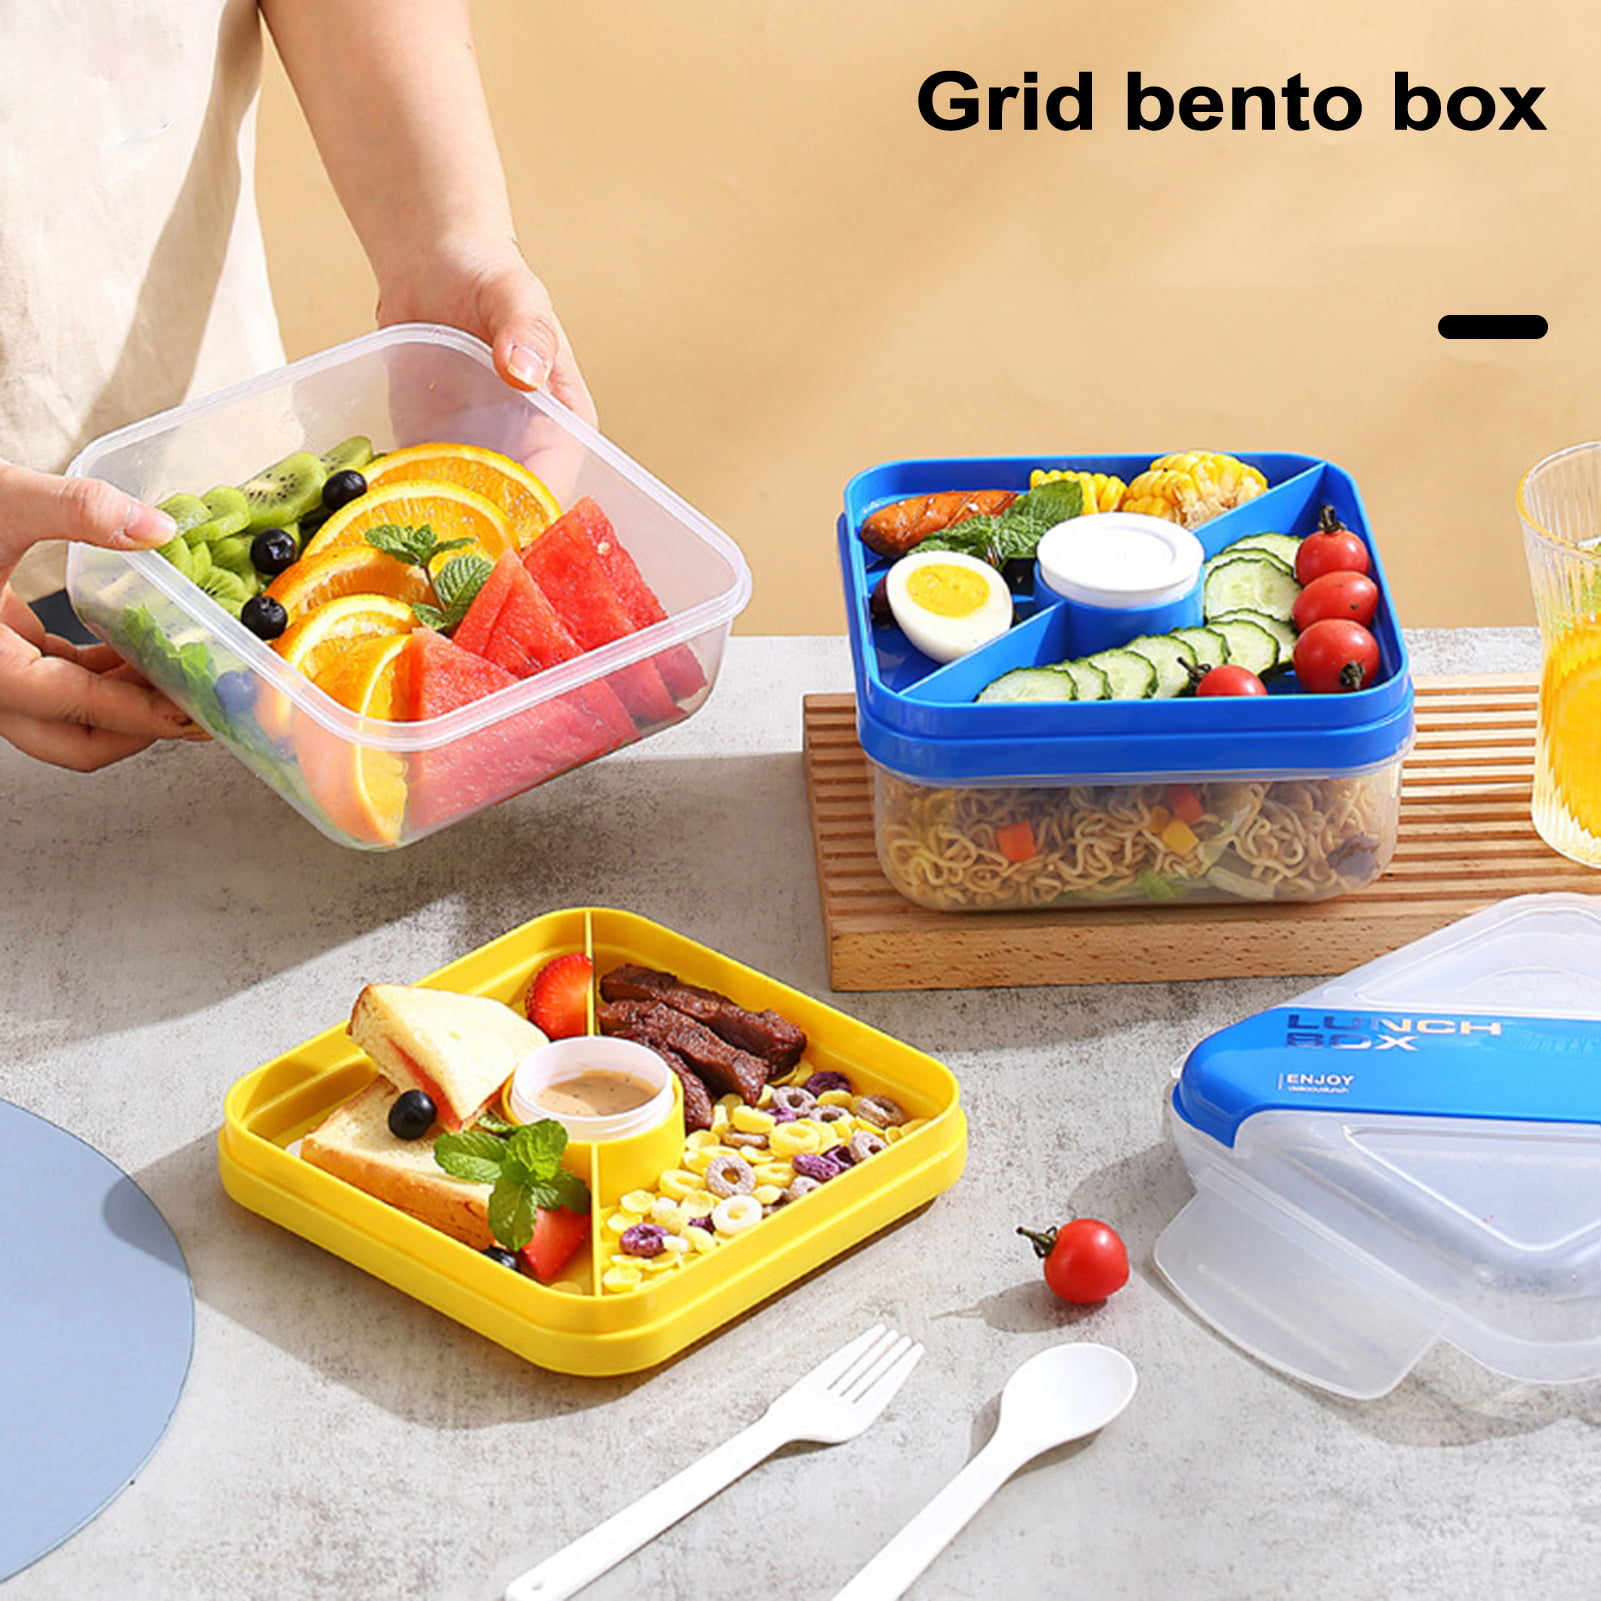 Sarkoyar Bento Lunch Box 2-Compartment Double Layer with Sauce Container  Reusable Spork Leak-proof Beto Box Home Supply